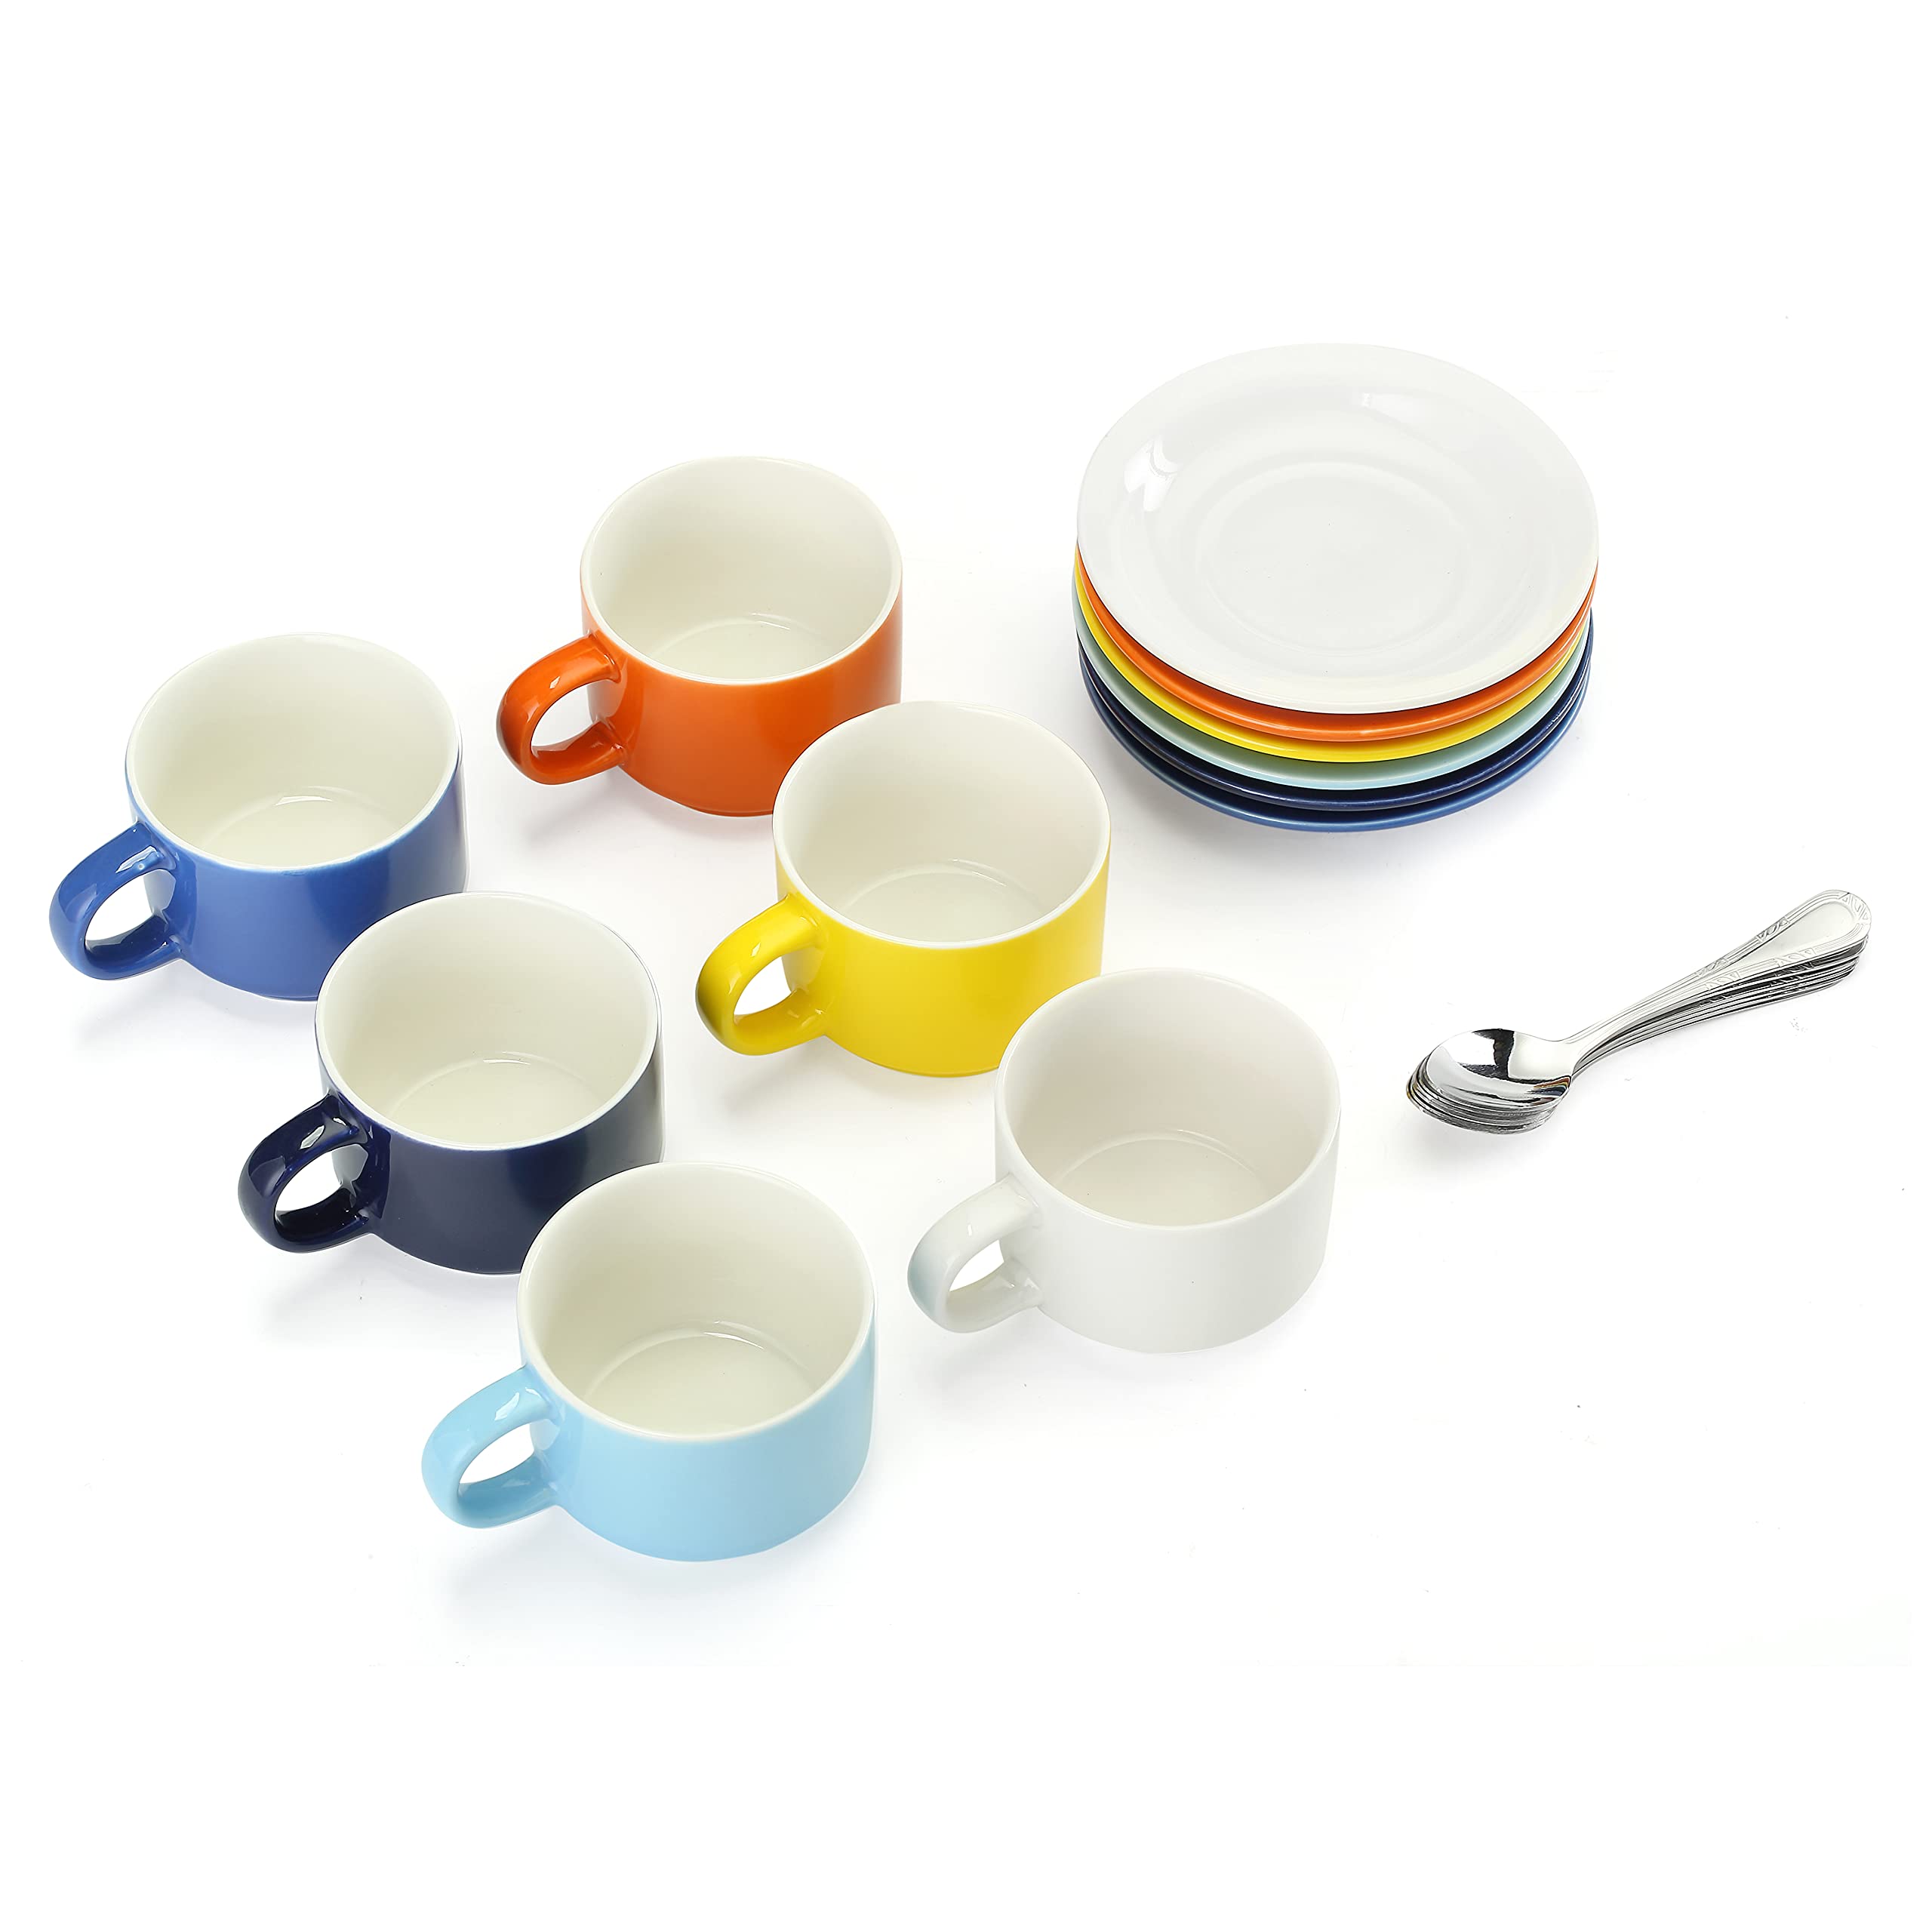 JULKYA SET OF 6 STACKABLE 4OZ MULTICOLORED PORCELAIN ESPRESSO CUPS WITH SAUCERS AND METAL STAND +BONUS STAINLESS STEEL SPOONS - LIGHTWEIGHT CUPS FOR ESPRESSO, LATTE, CAFÉ MACCHIATO, OR TEA, DEMITASSE